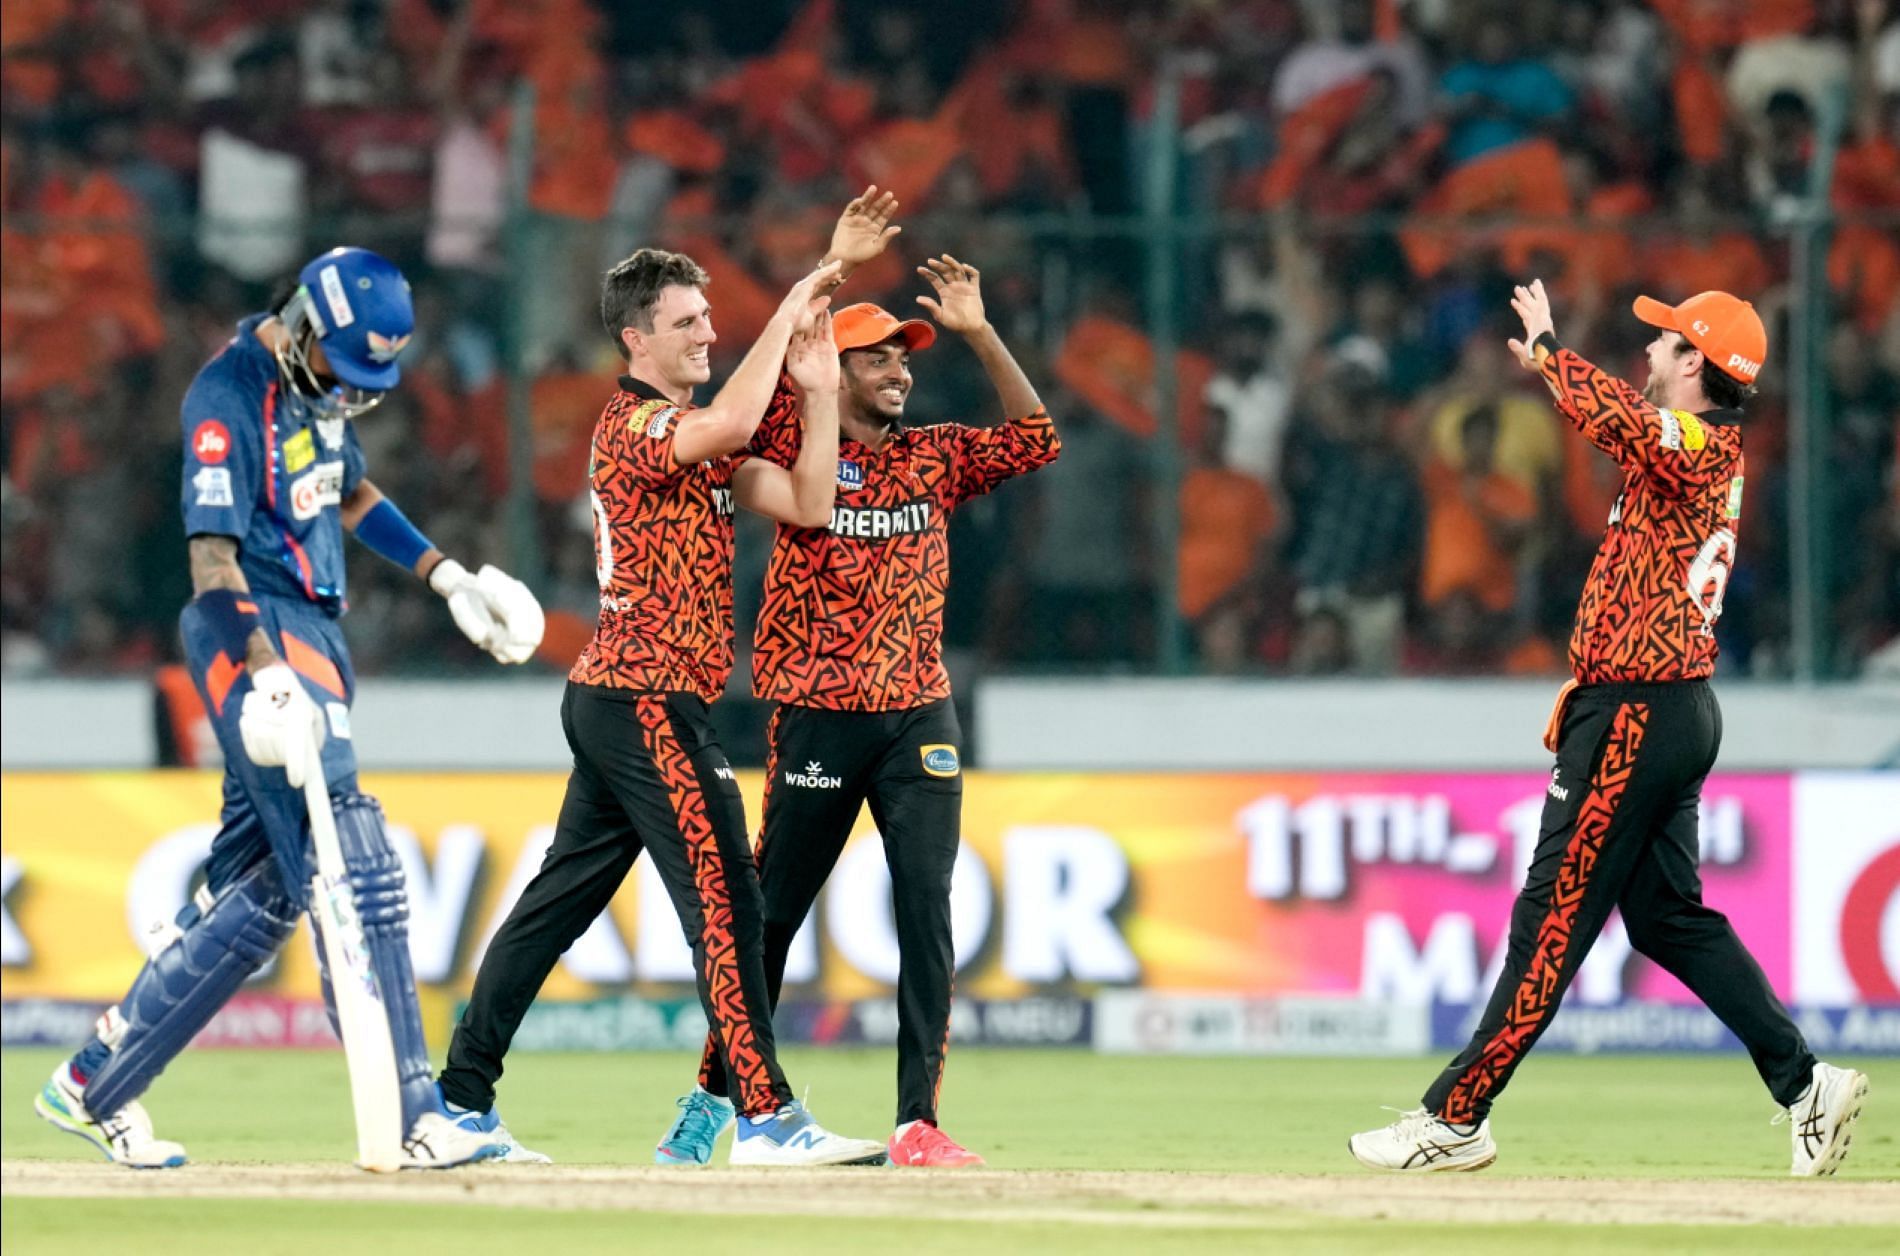 Rahul played another slow-paced innings against SRH [Credit: IPL Twitter handle]